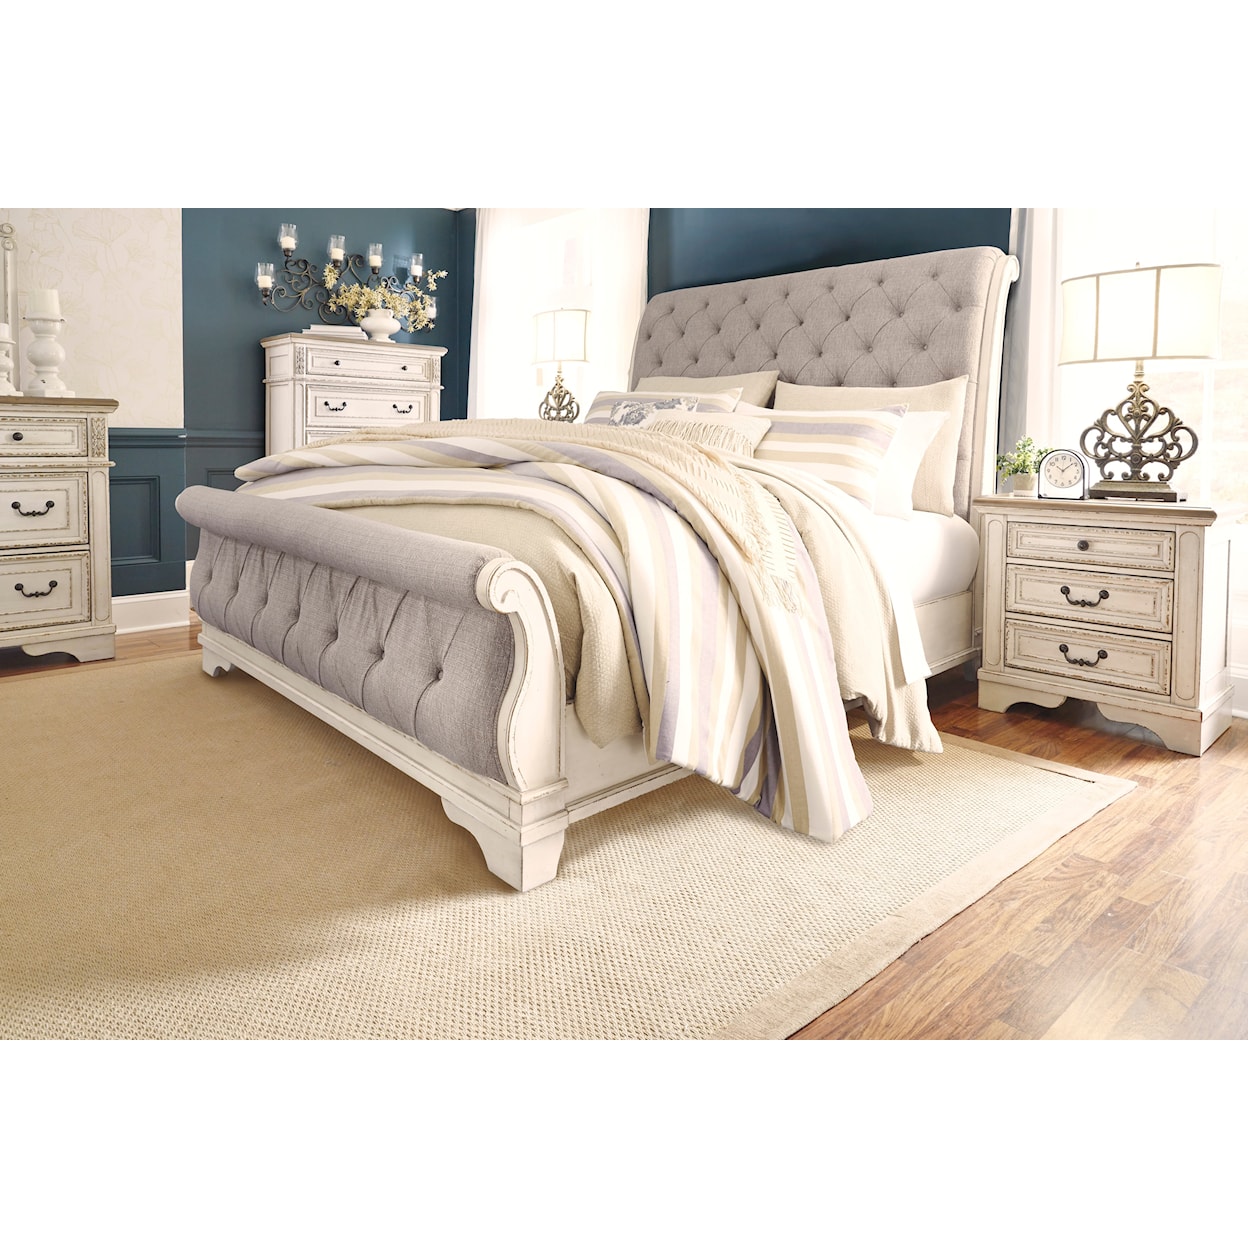 Signature Design by Ashley Furniture Realyn Queen Upholstered Sleigh Bed